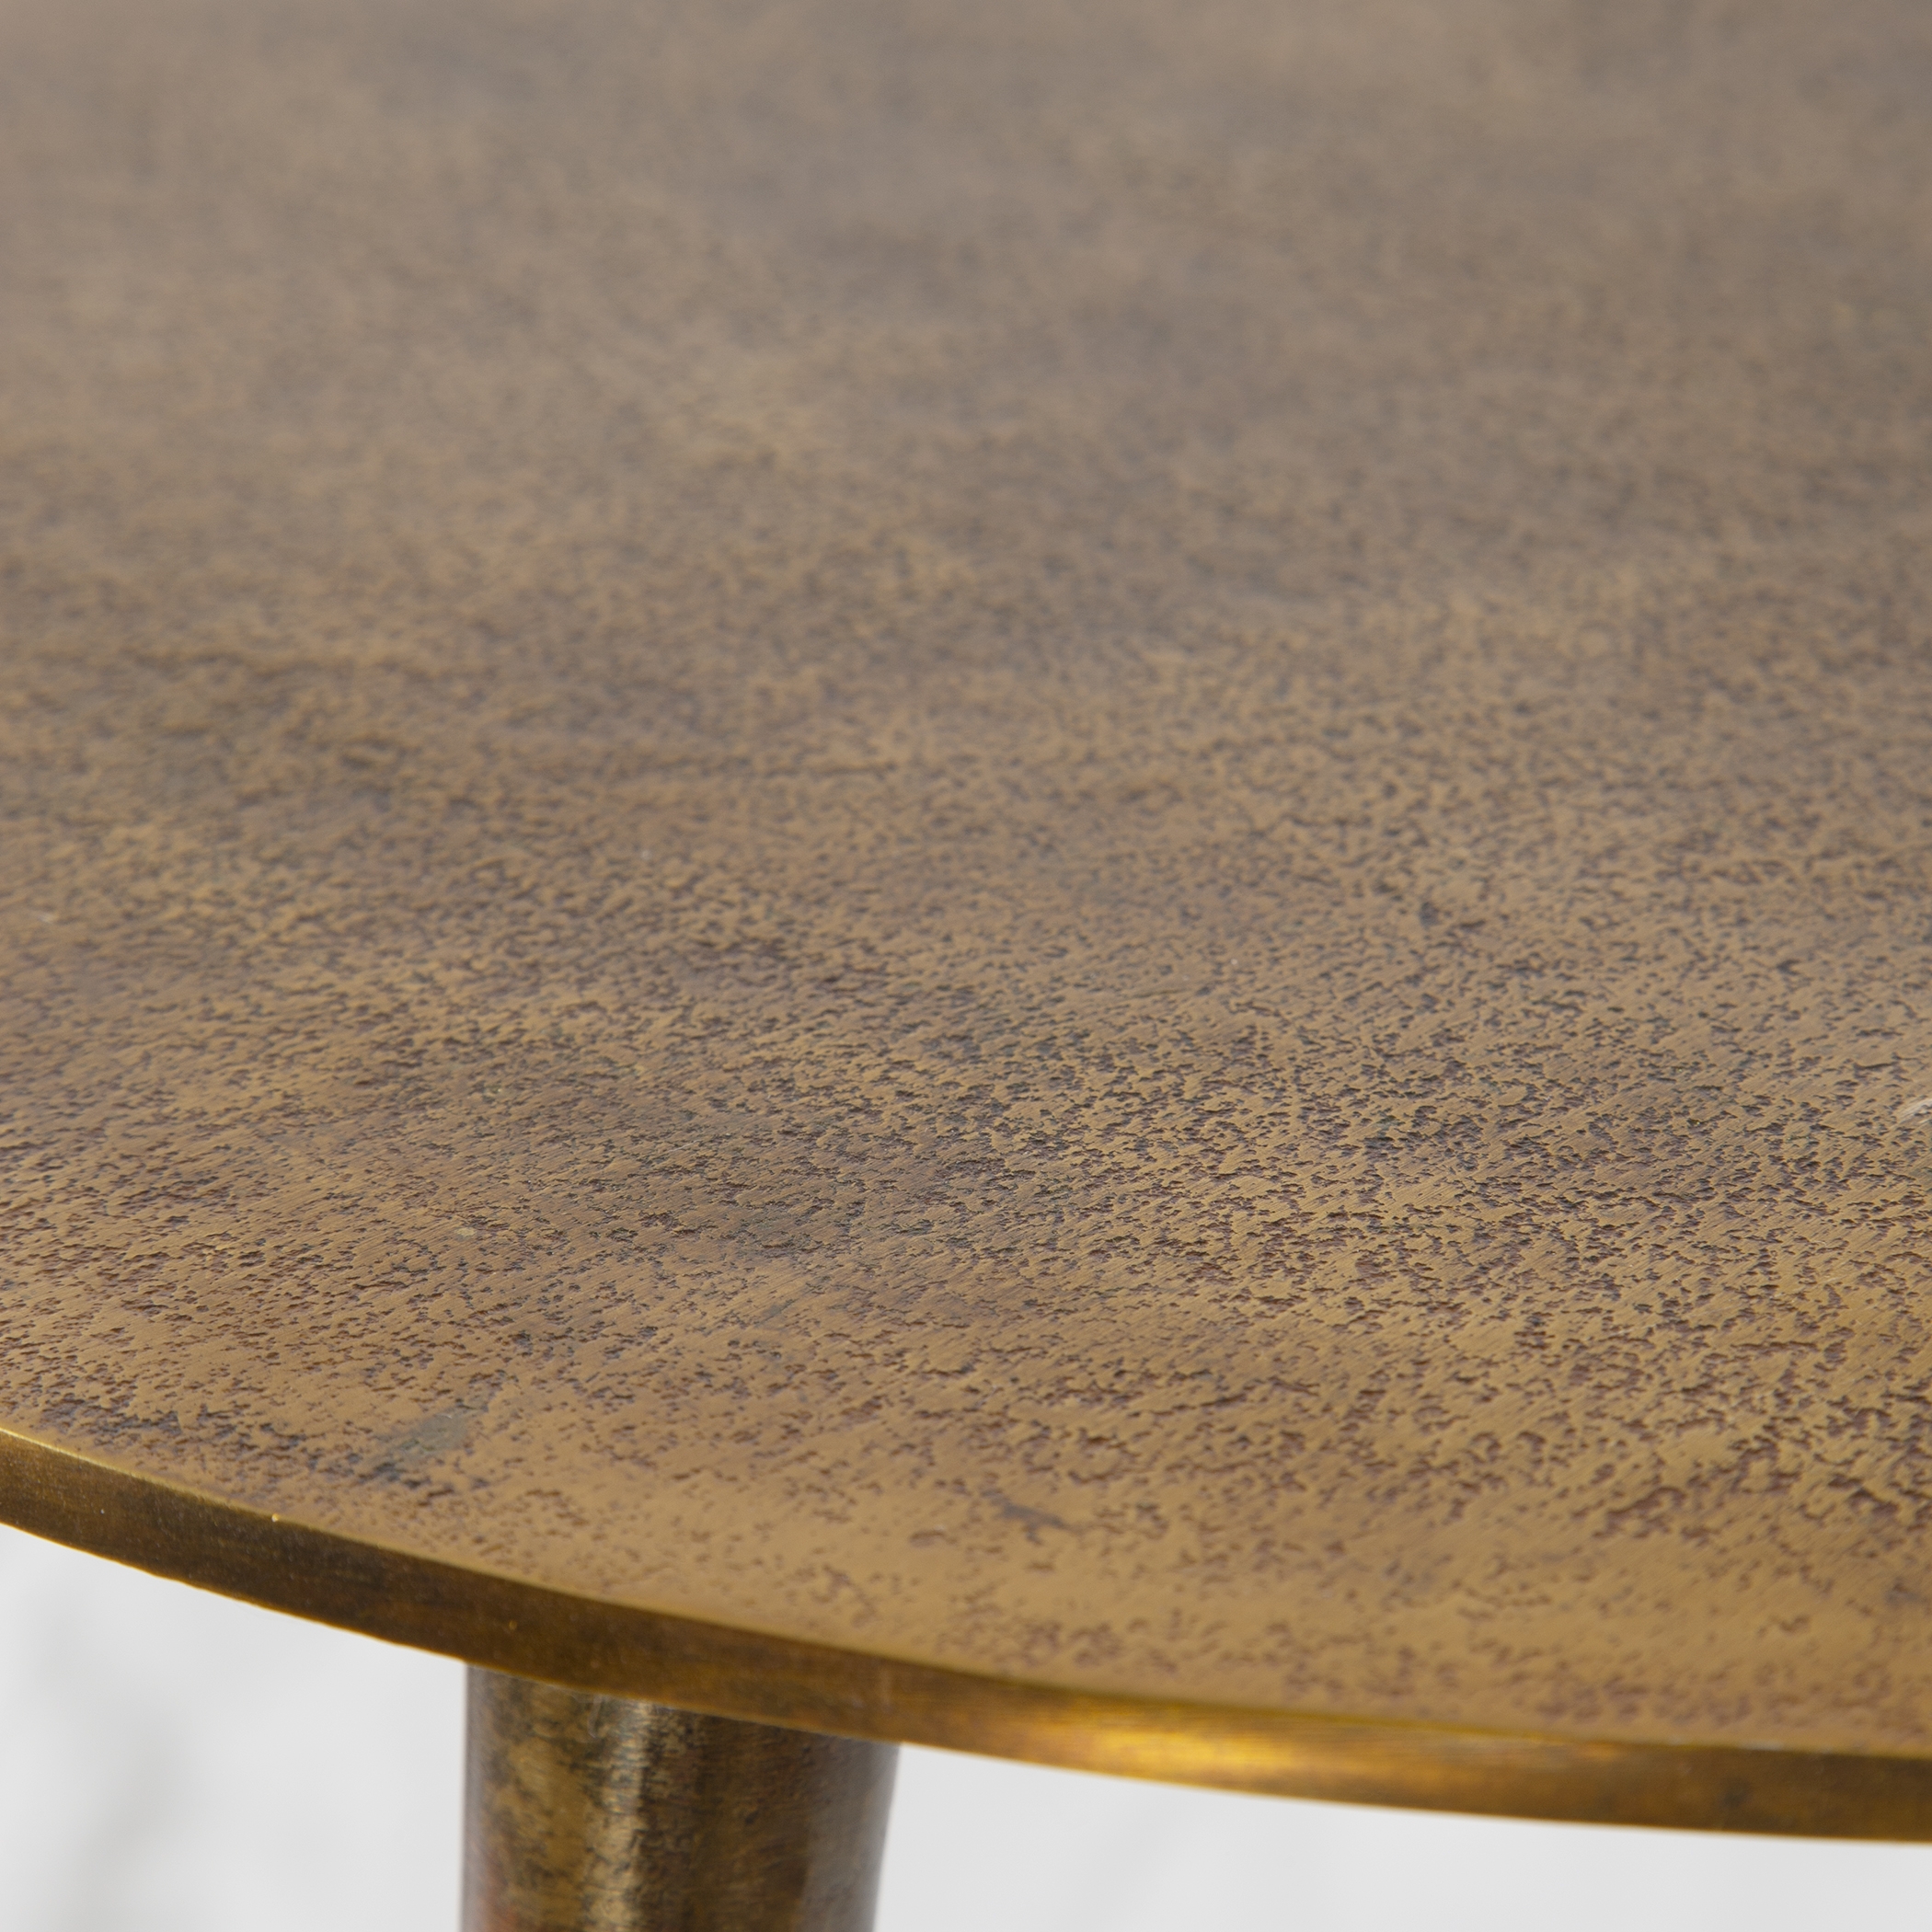 Kasai Gold Coffee Tables, S/3 - Image 2